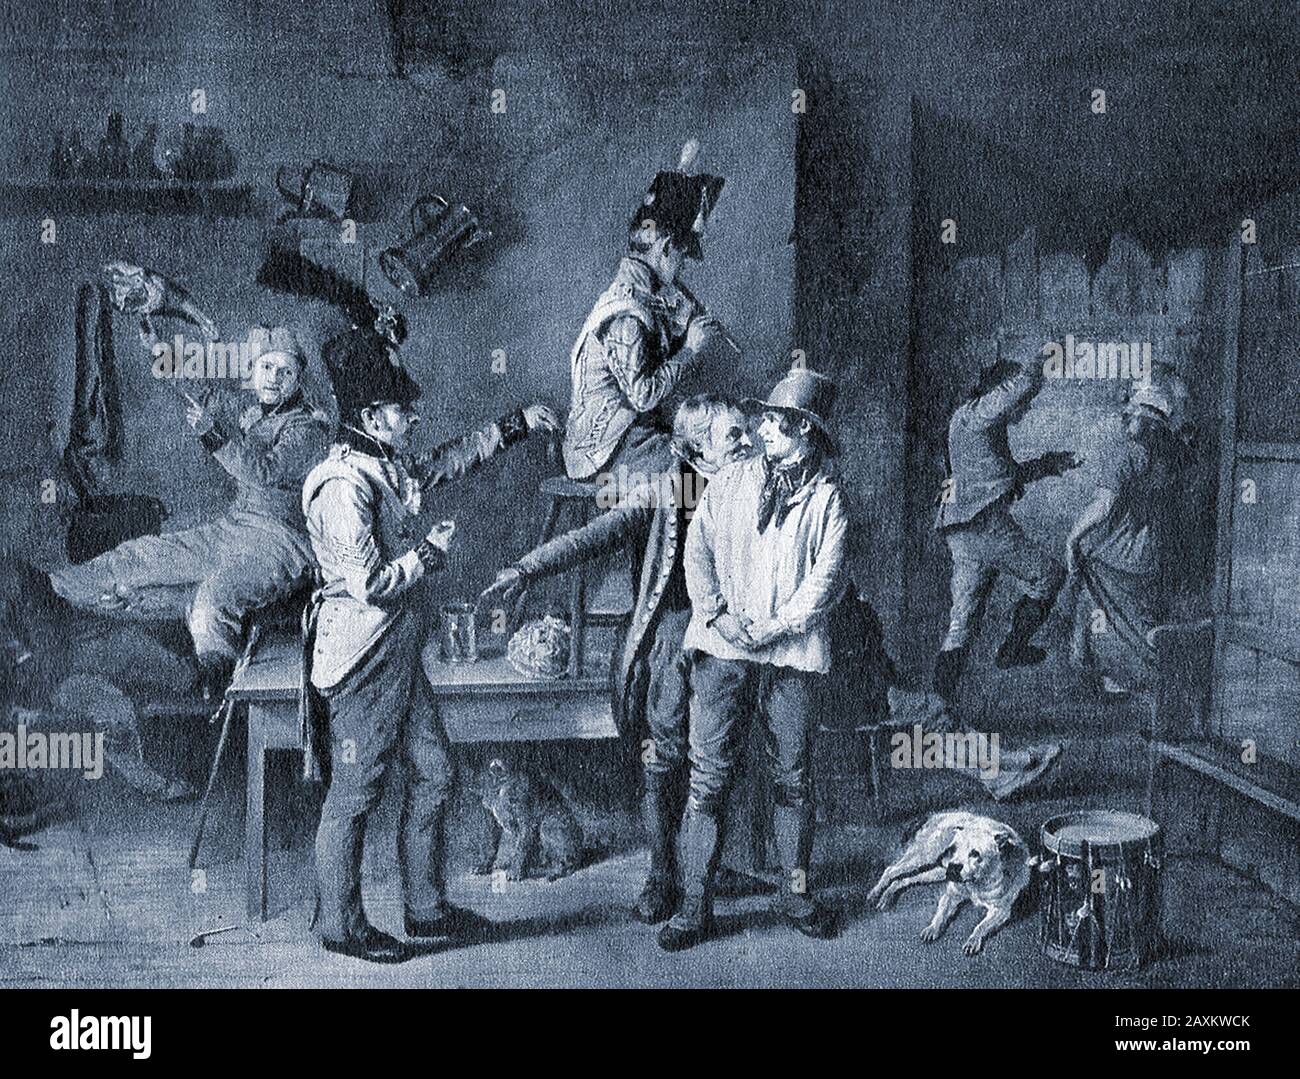 c1800 scene of soldiers recruiting at a British public house, inn or tavern Stock Photo